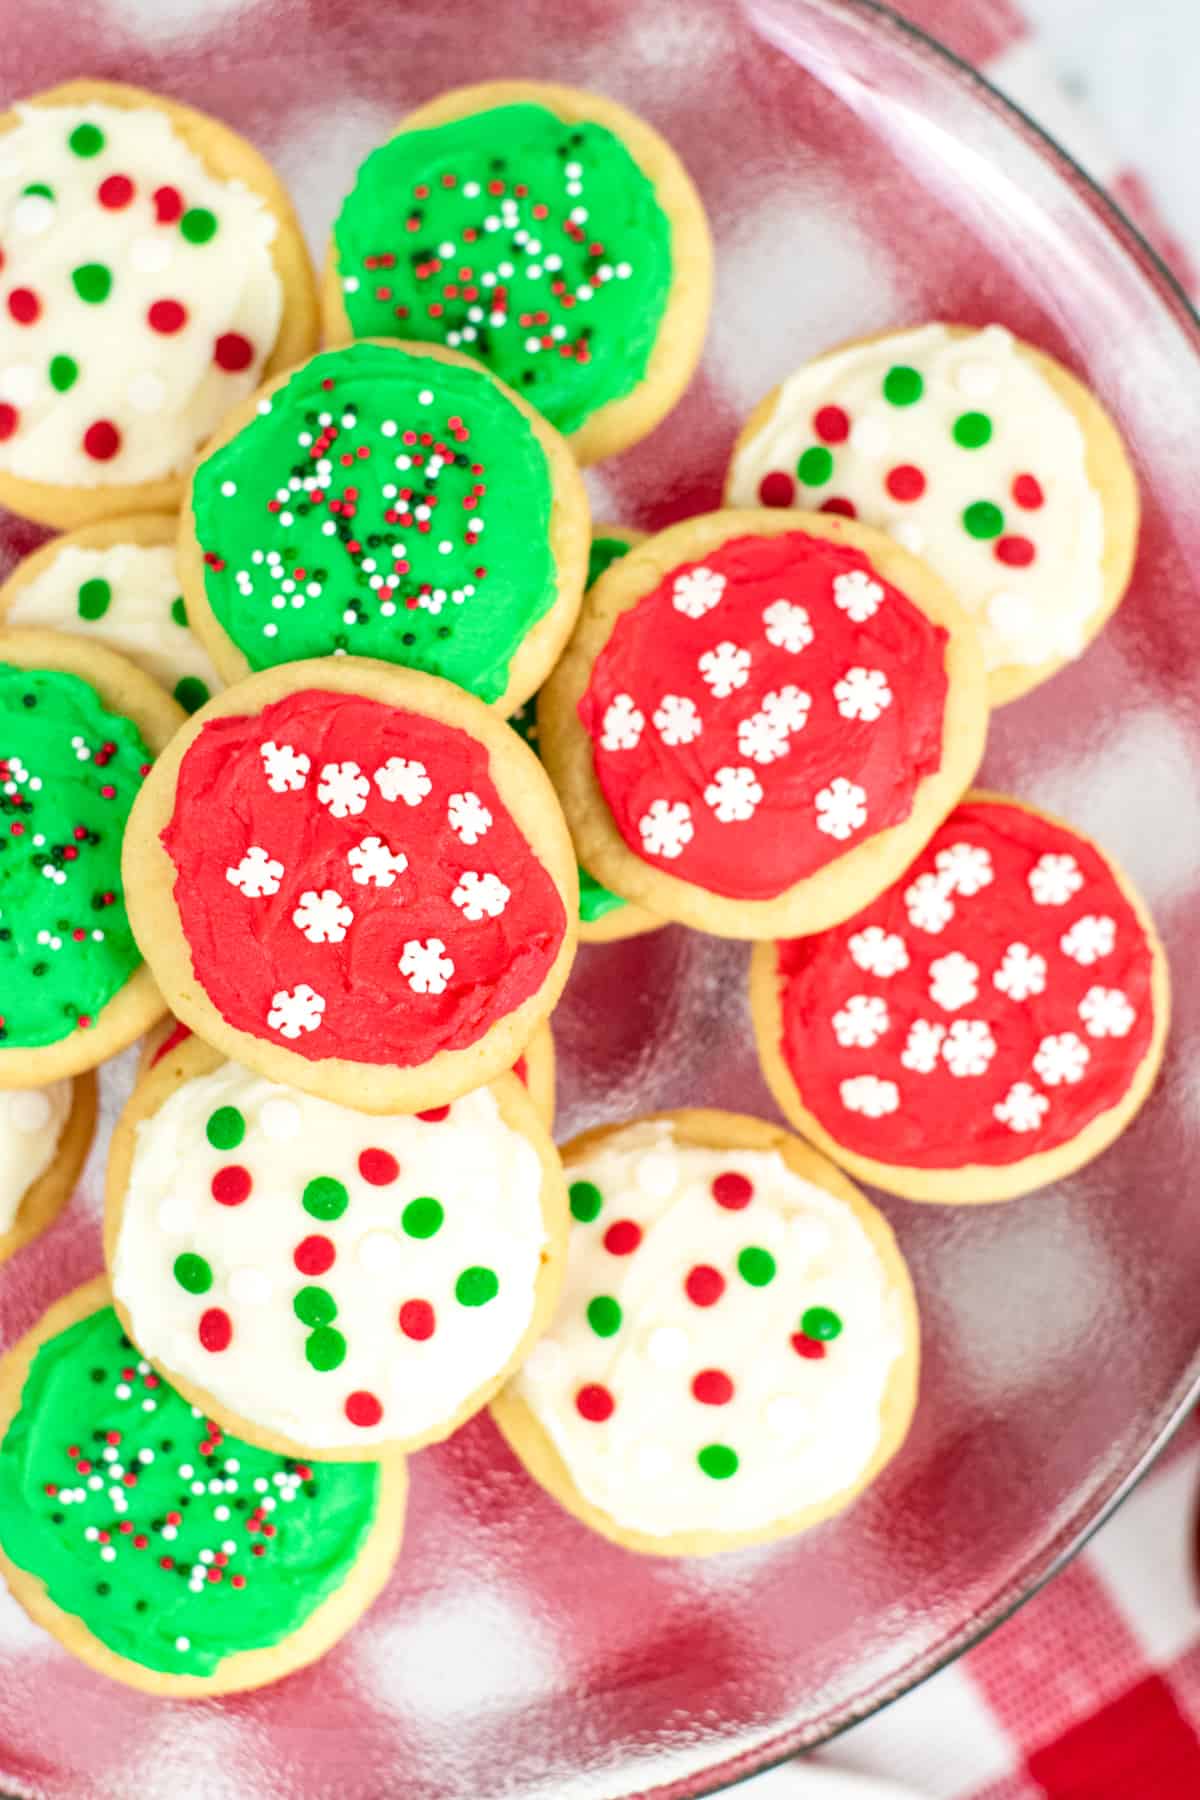 Platter of round cookies topped with either red frosting, green frosting, or white frosting and red, white, and green sprinkles